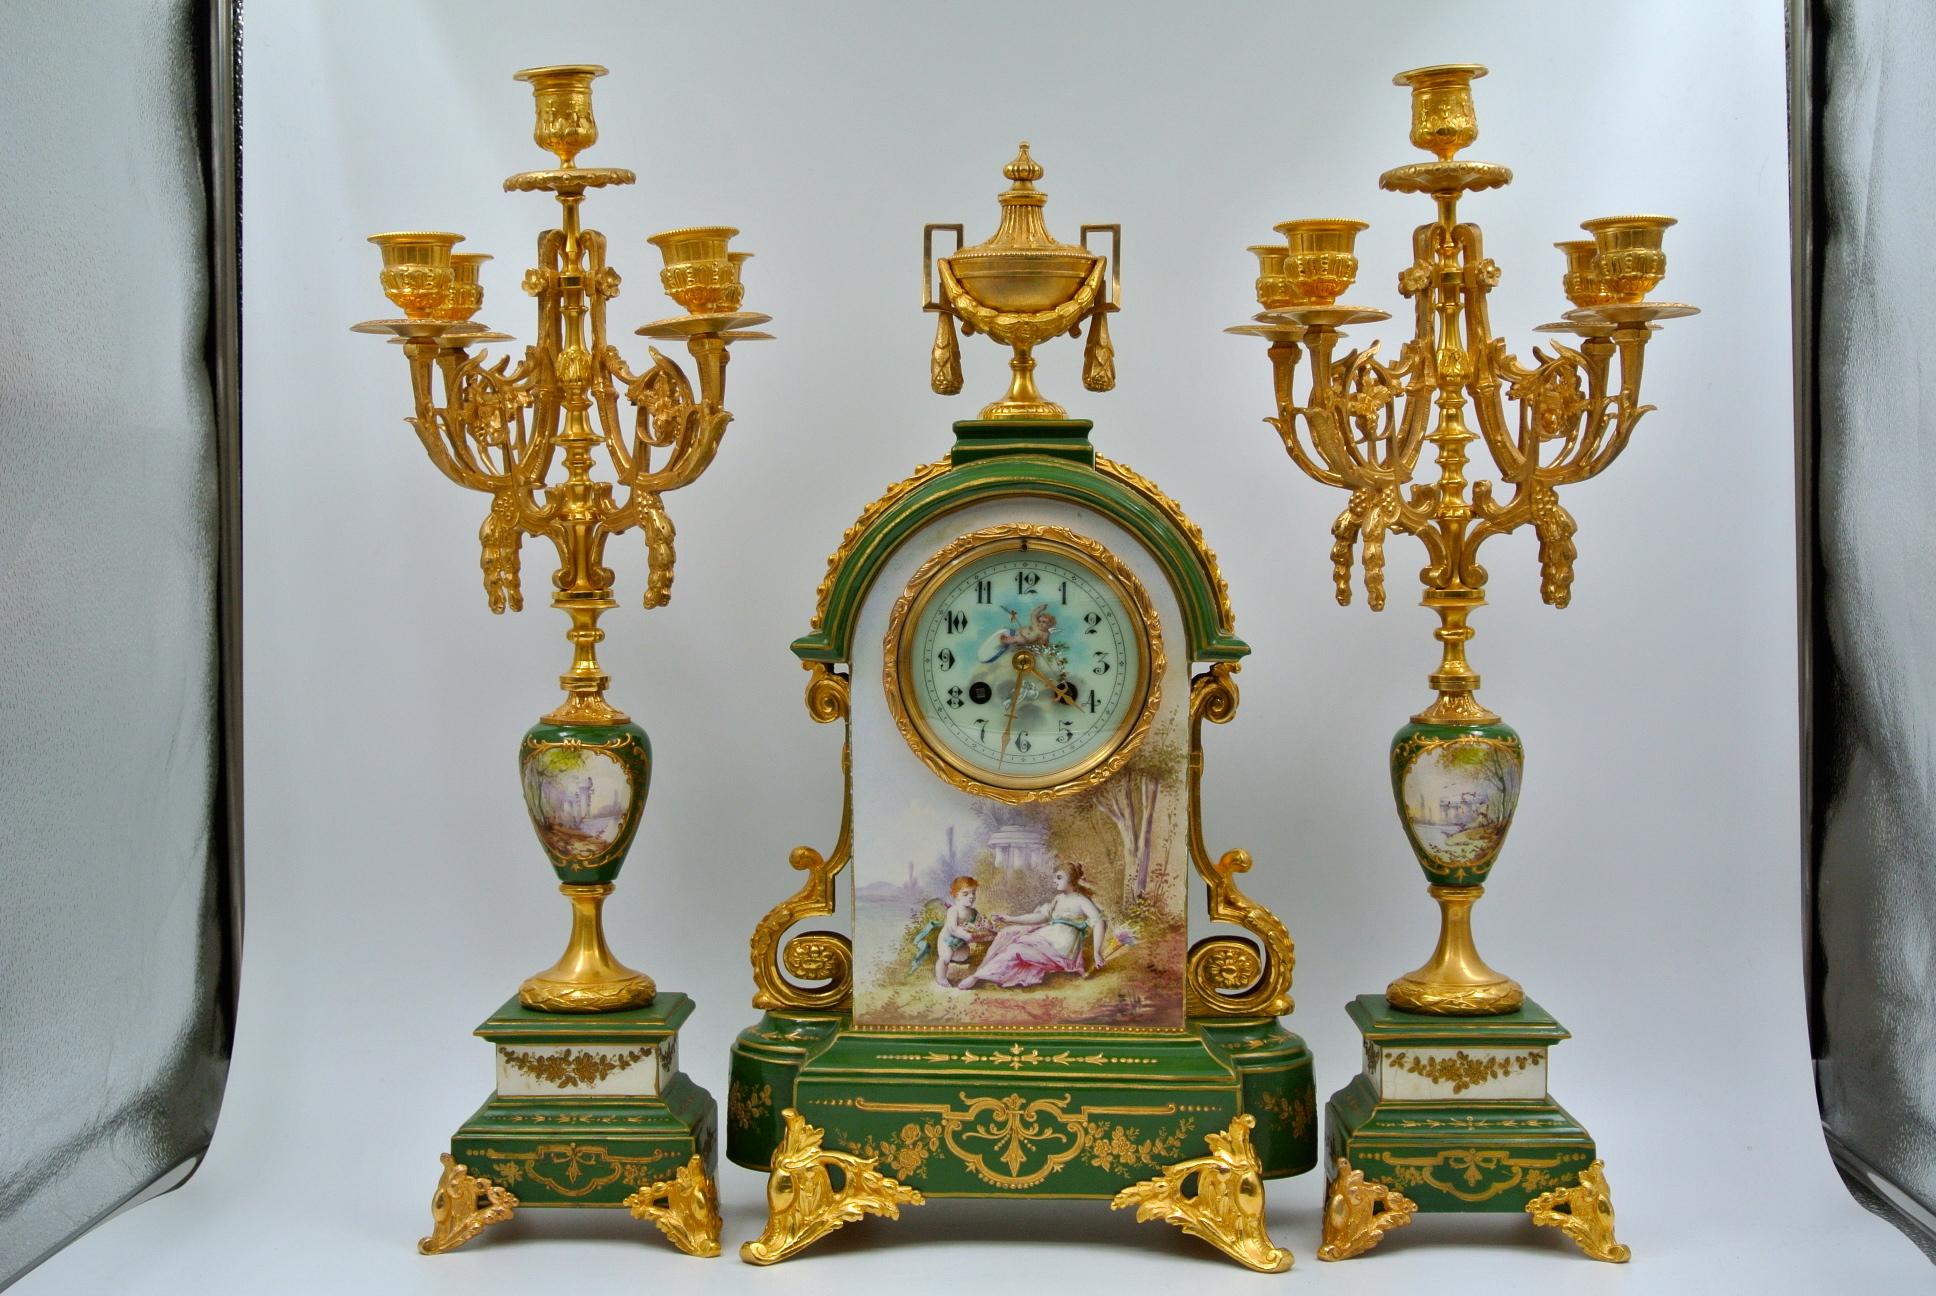 Napoleon III Important Mantel Set in Painted and Gilded Bronze Porcelain